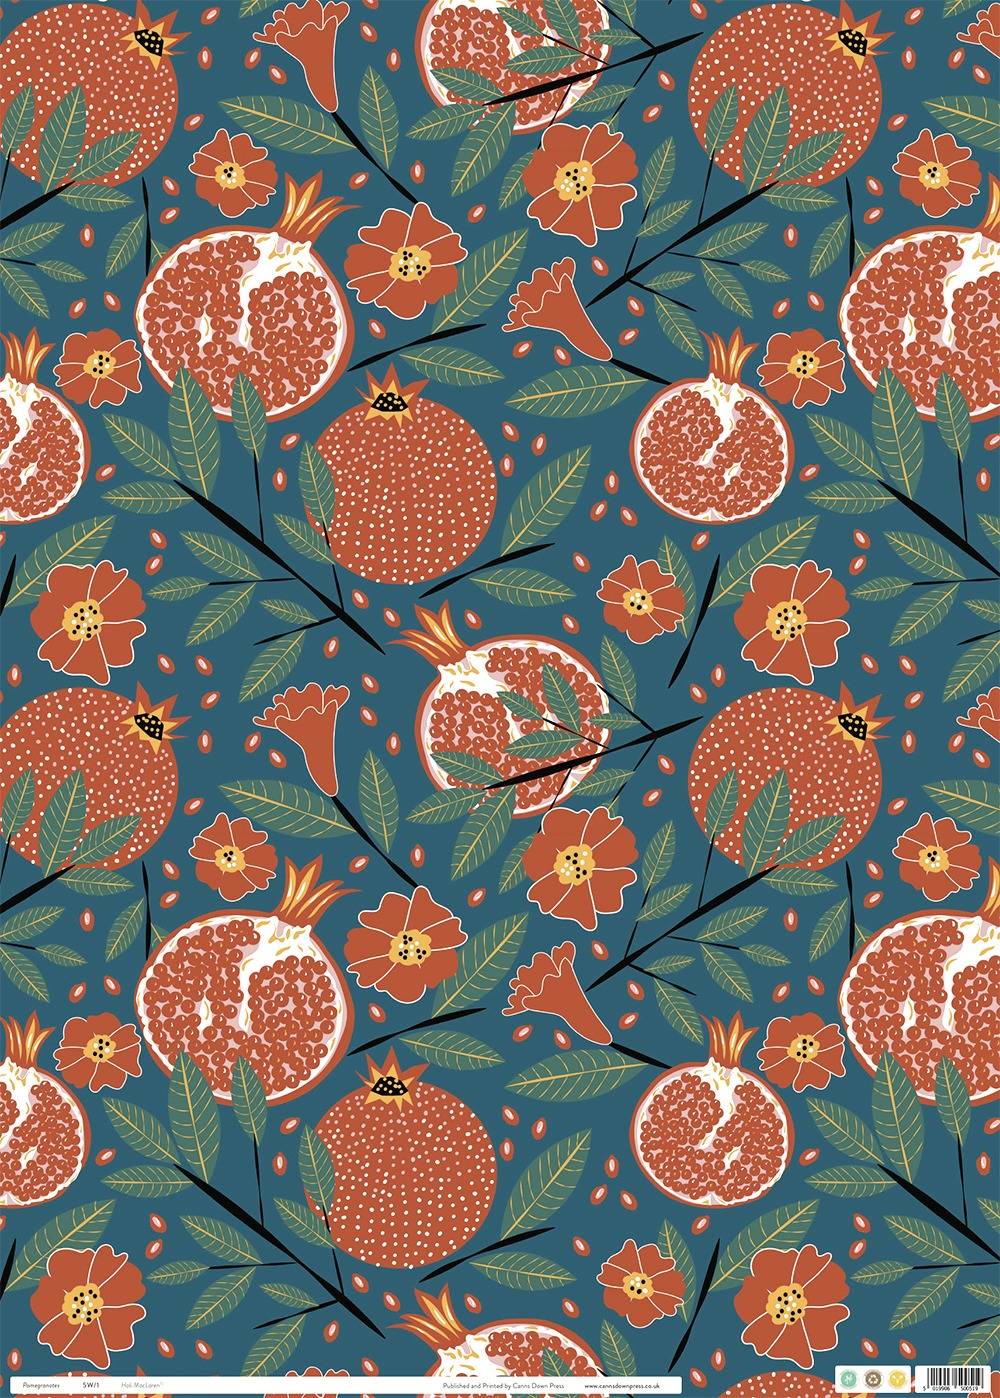 Pomegranates Wrapping Paper - The Bristol Artisan Handmade Sustainable Gifts and Homewares.